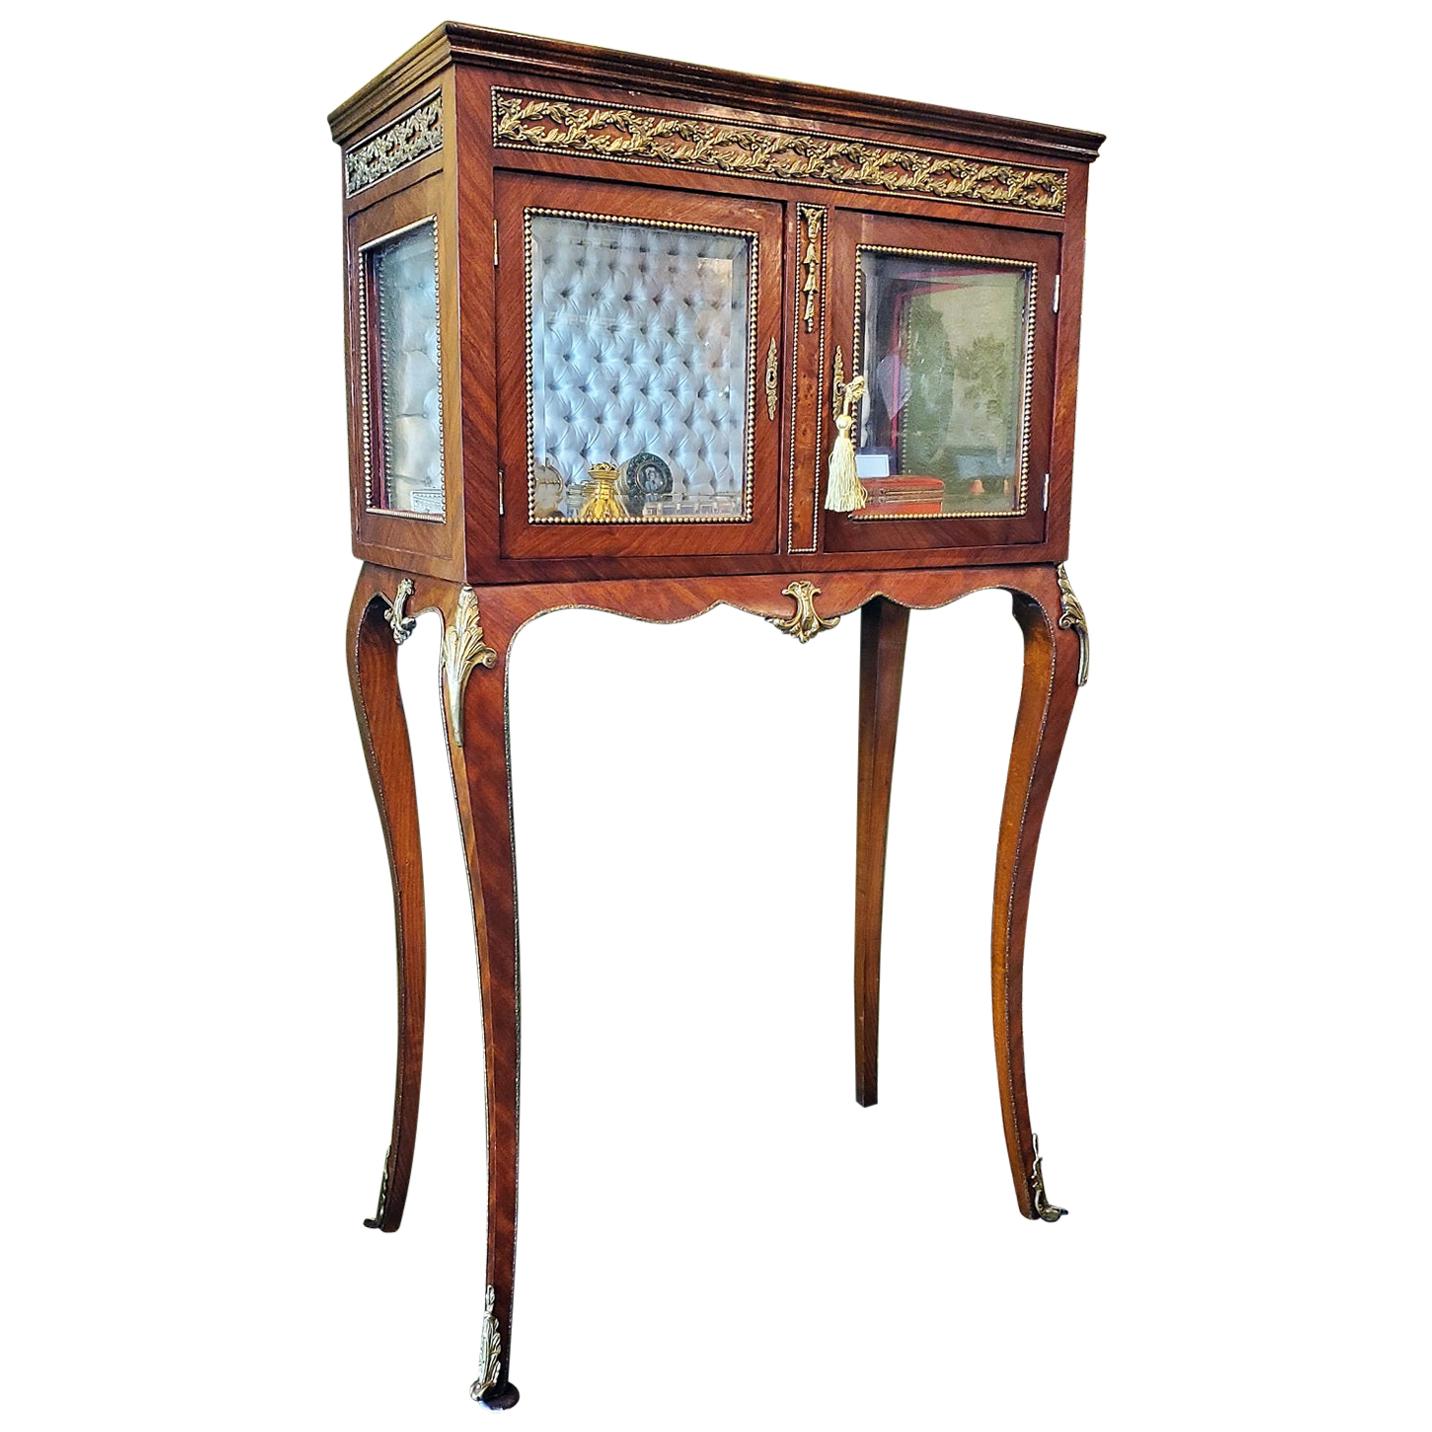 19C French Boudoir Vitrine in the Style of Louis XV